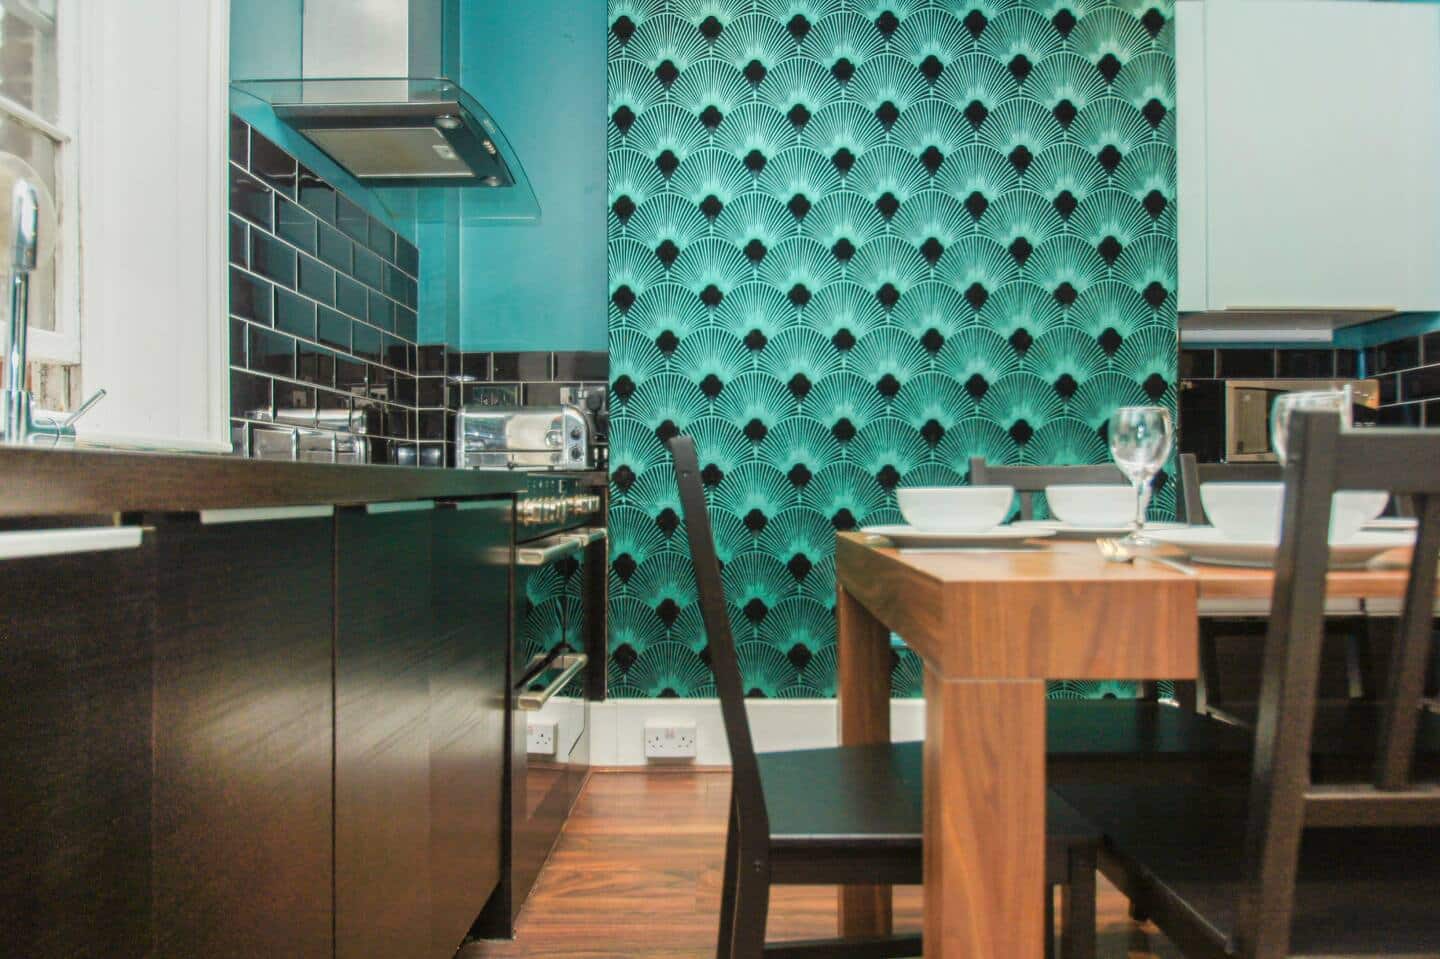 The wall paper design in the dining area is a feast to the eyes.